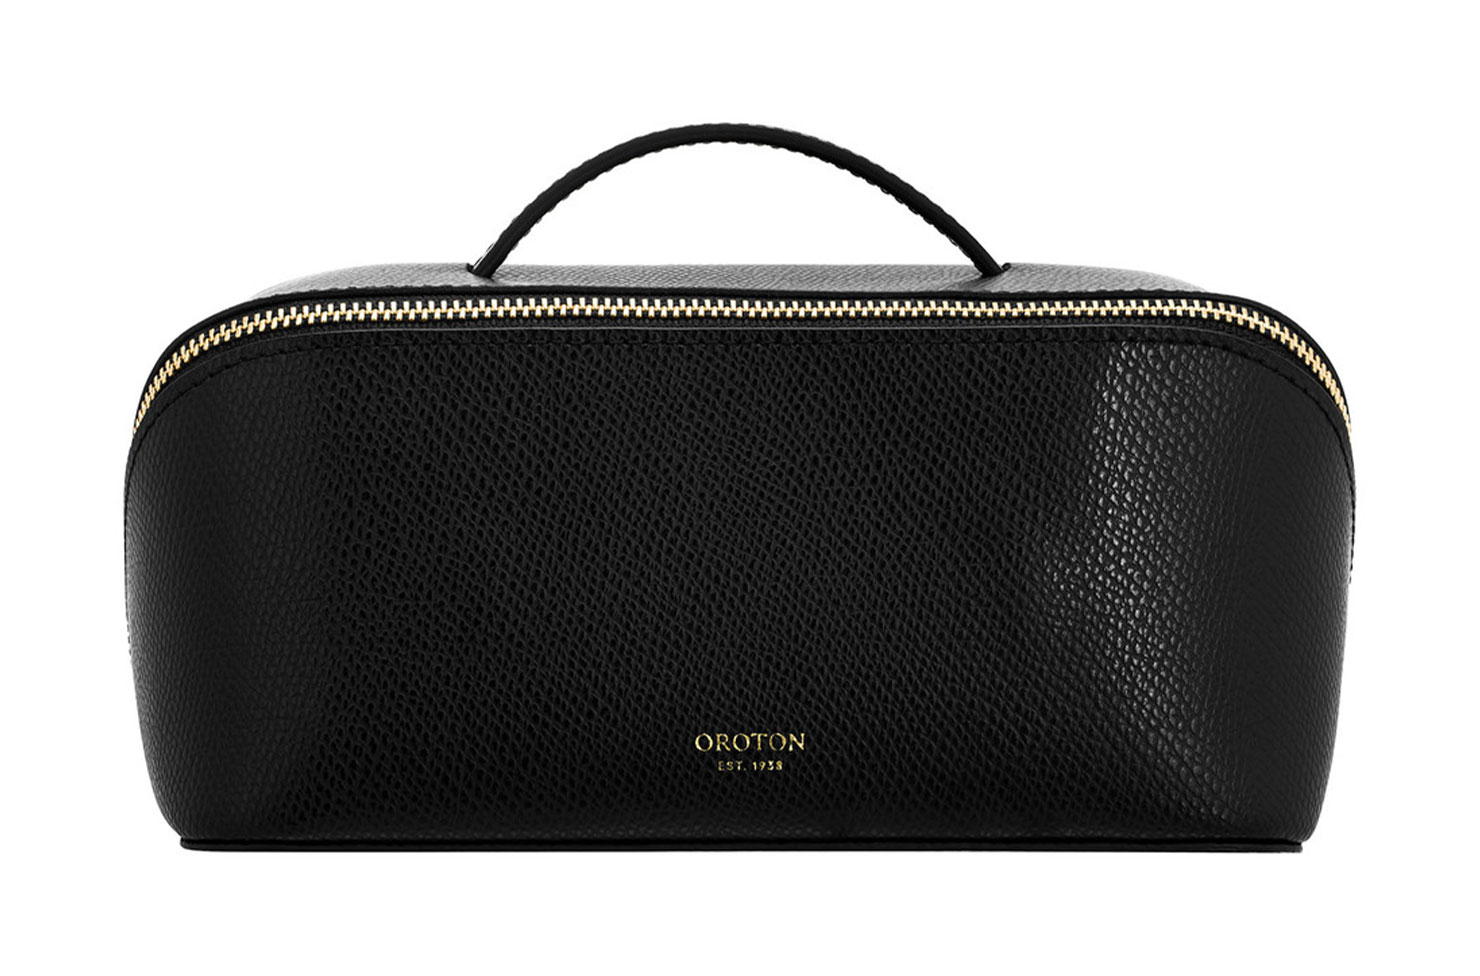 Best gifts for travellers - beauty case